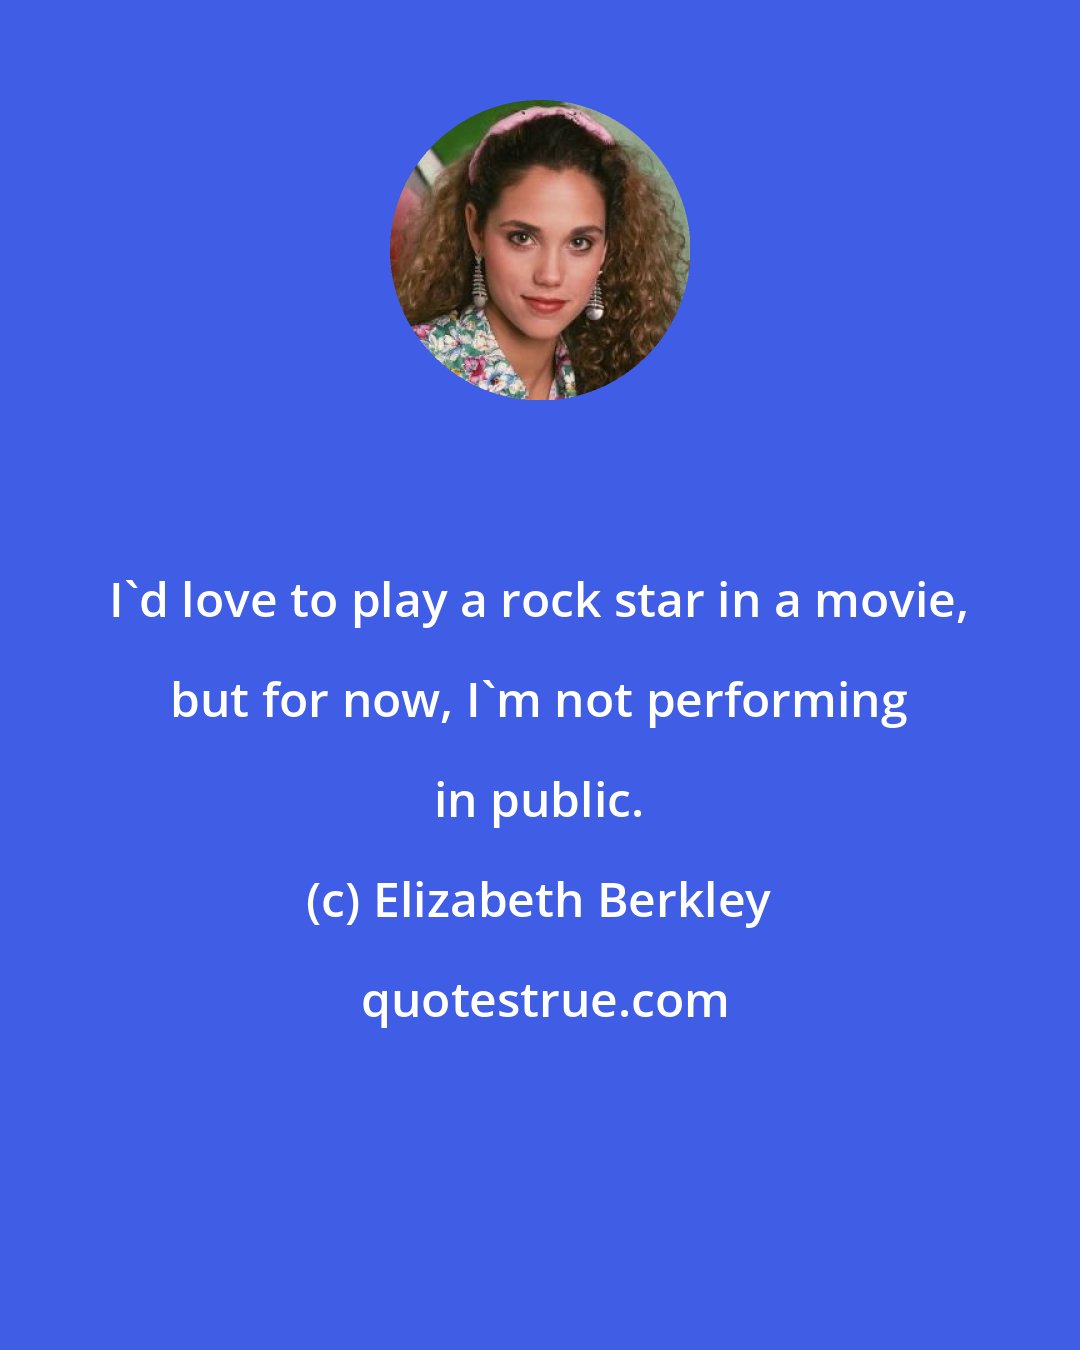 Elizabeth Berkley: I'd love to play a rock star in a movie, but for now, I'm not performing in public.